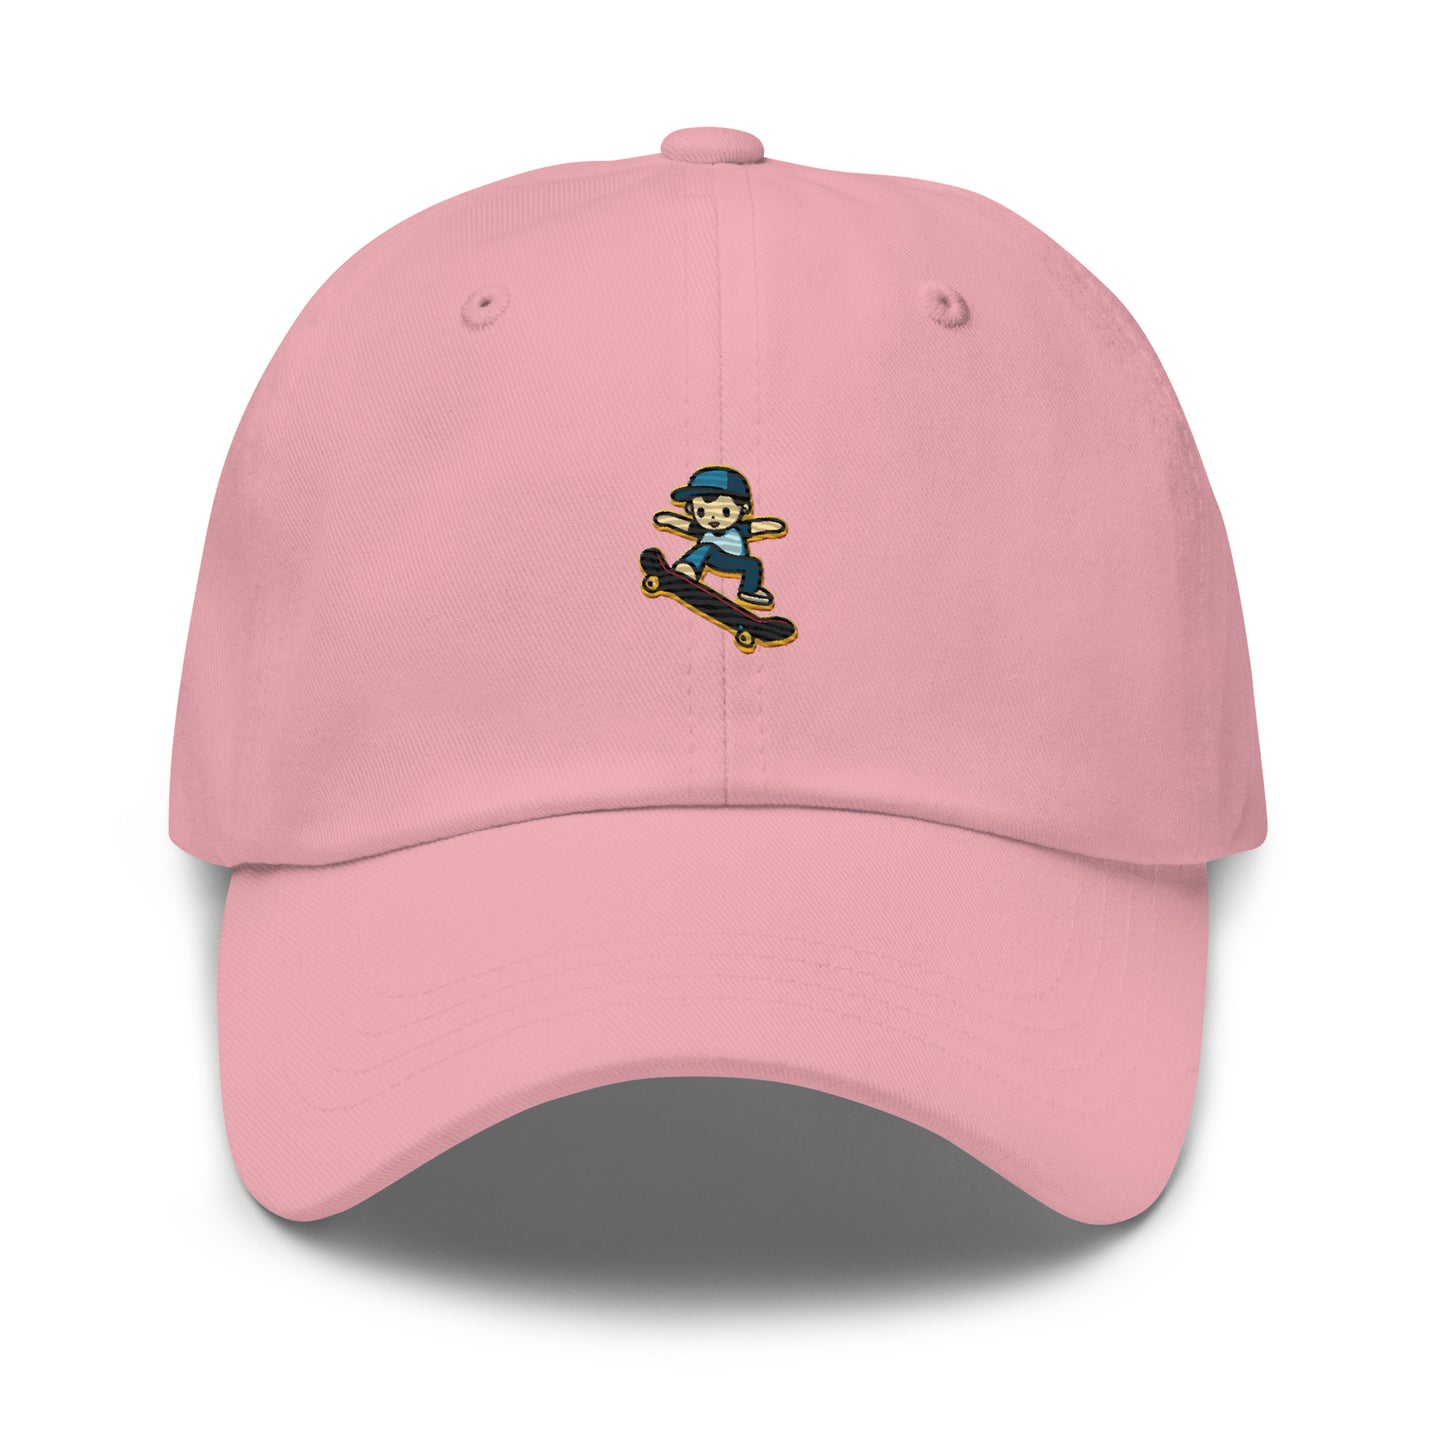 Dad Cap with Kid On a Skateboard Symbol